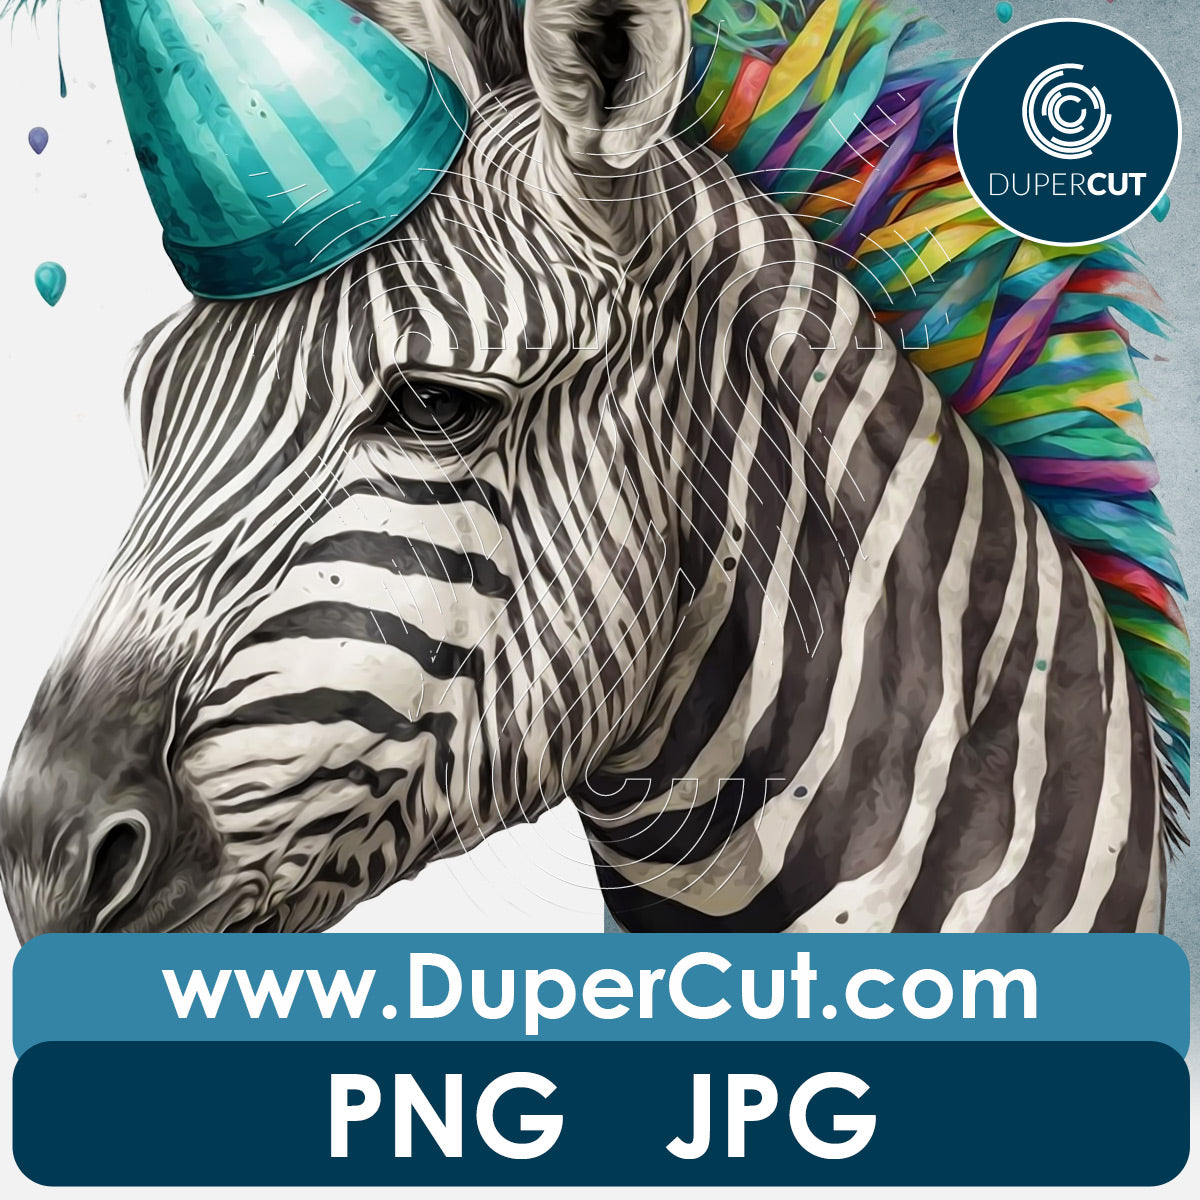 Colorful Zebra in a party hat with transparent background - PNG file sublimation pattern by www.dupercut.com